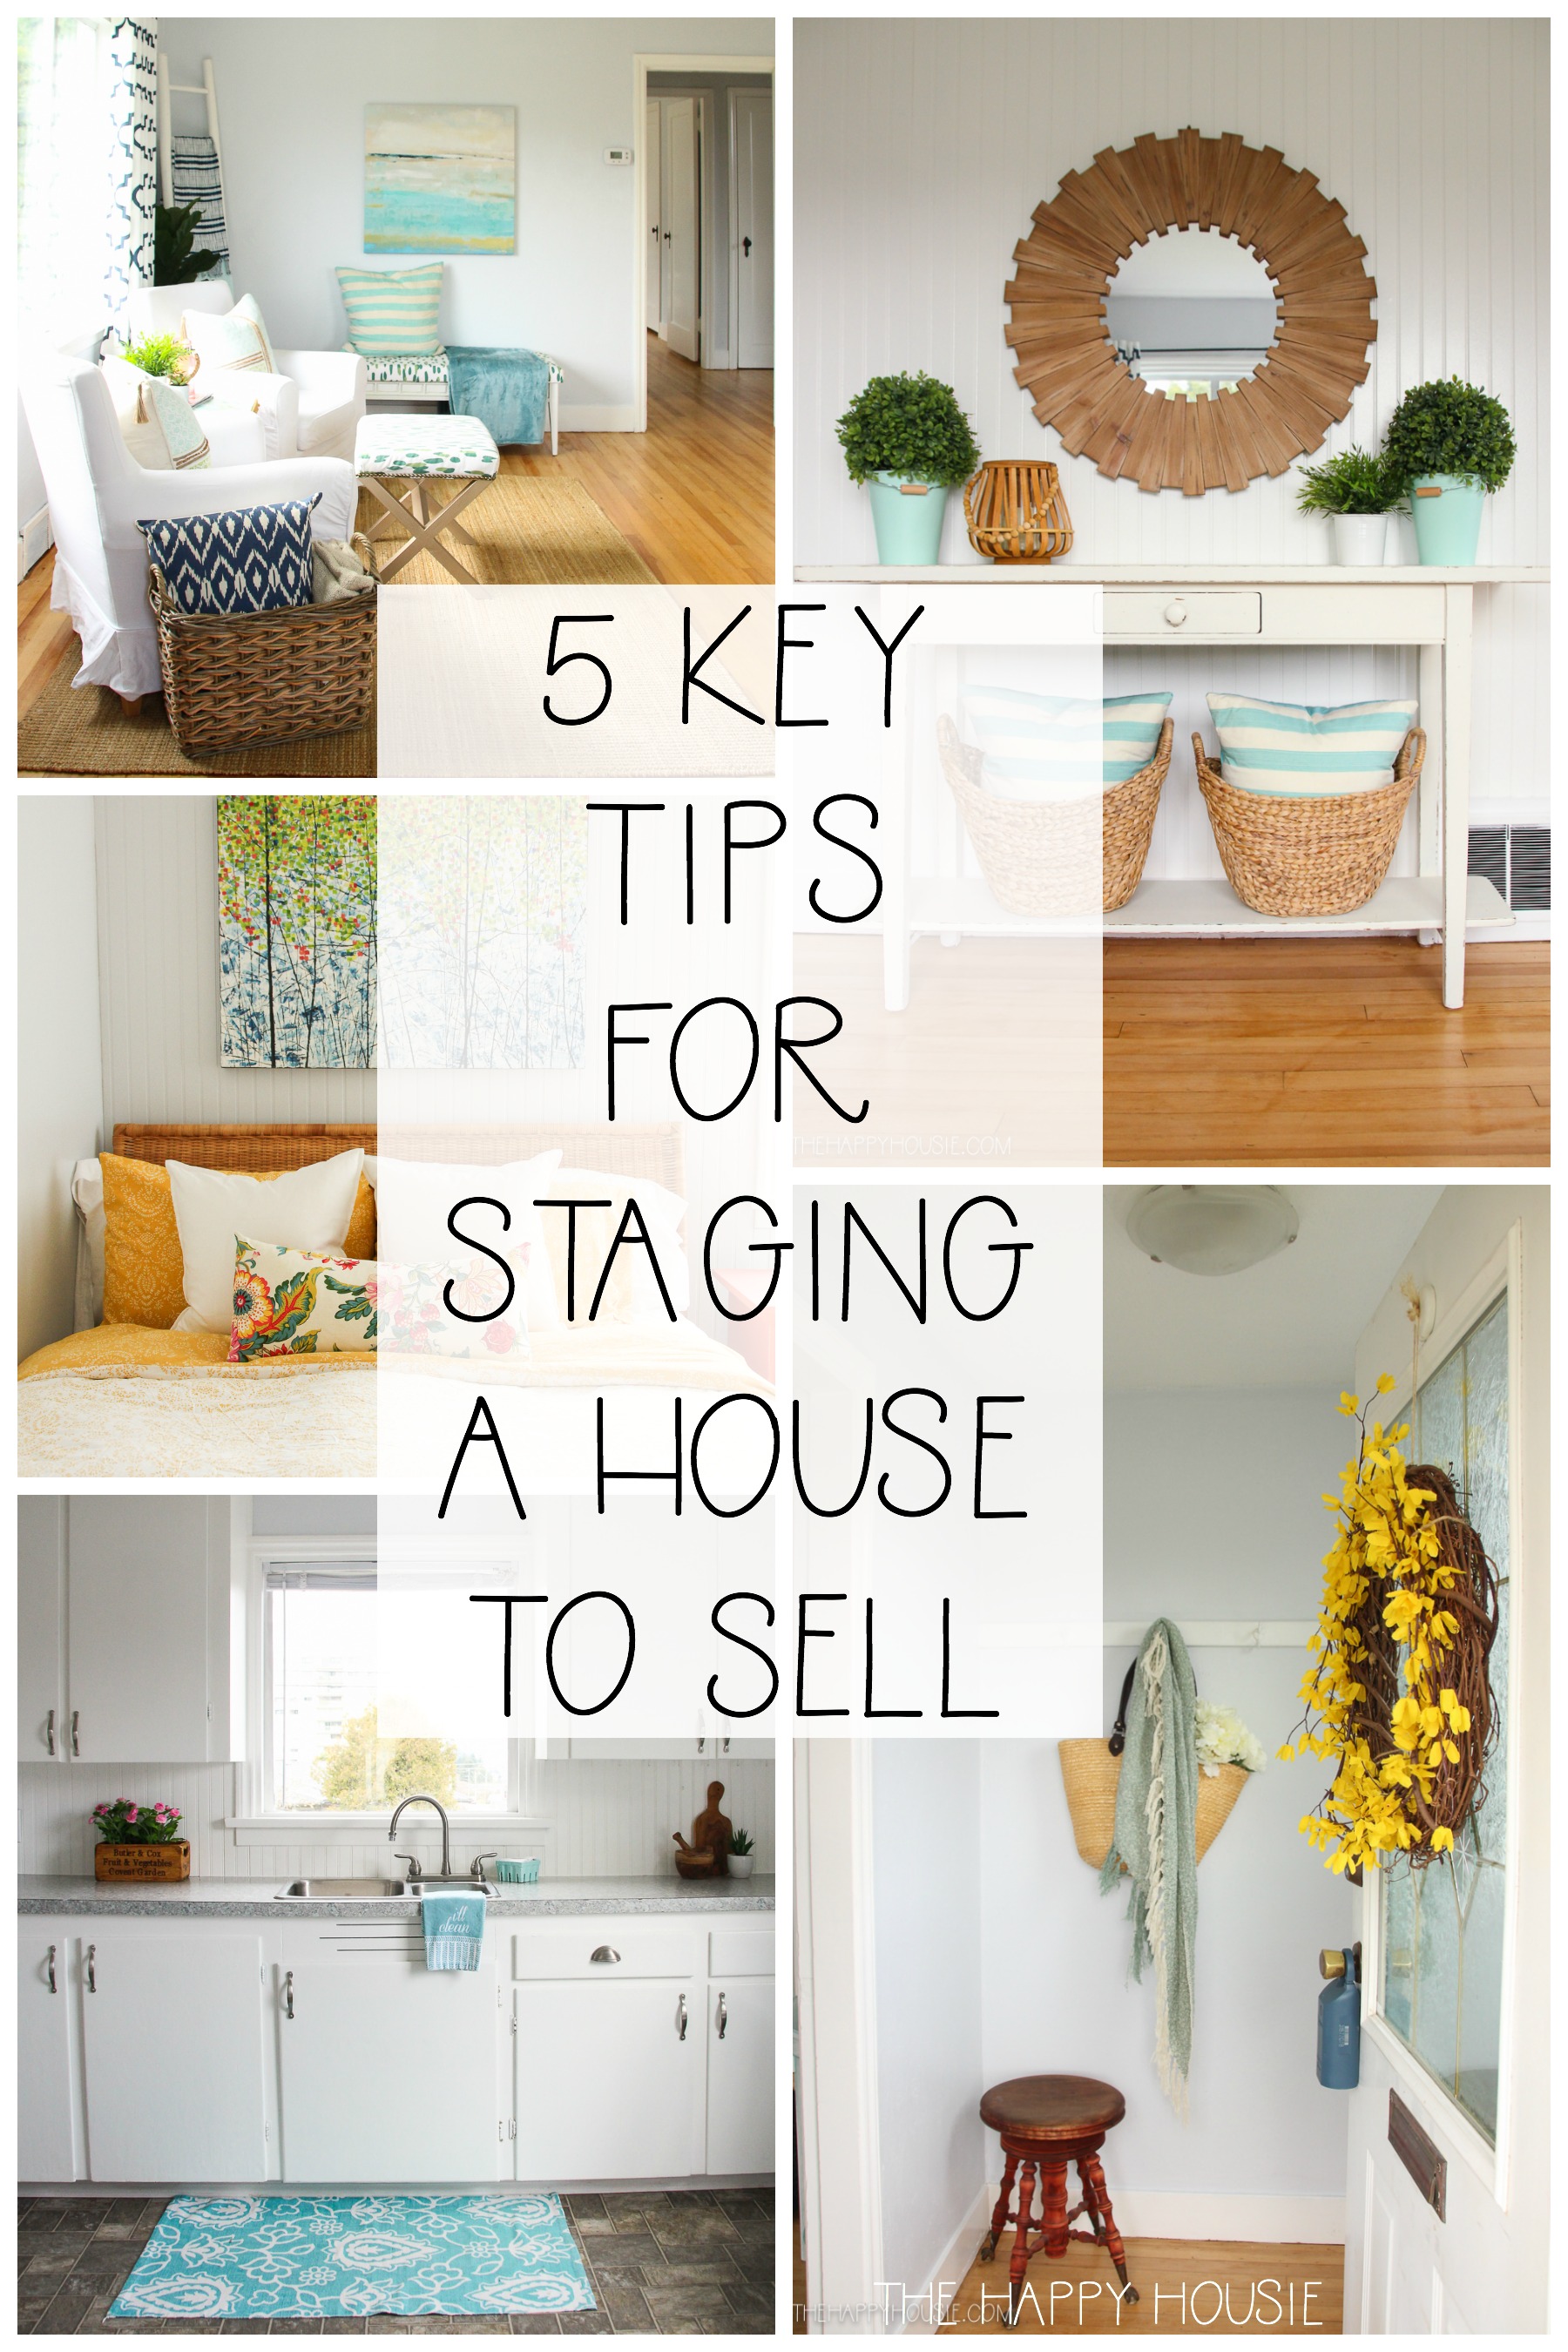 5 Key Tips For Staging A House To Sell poster.